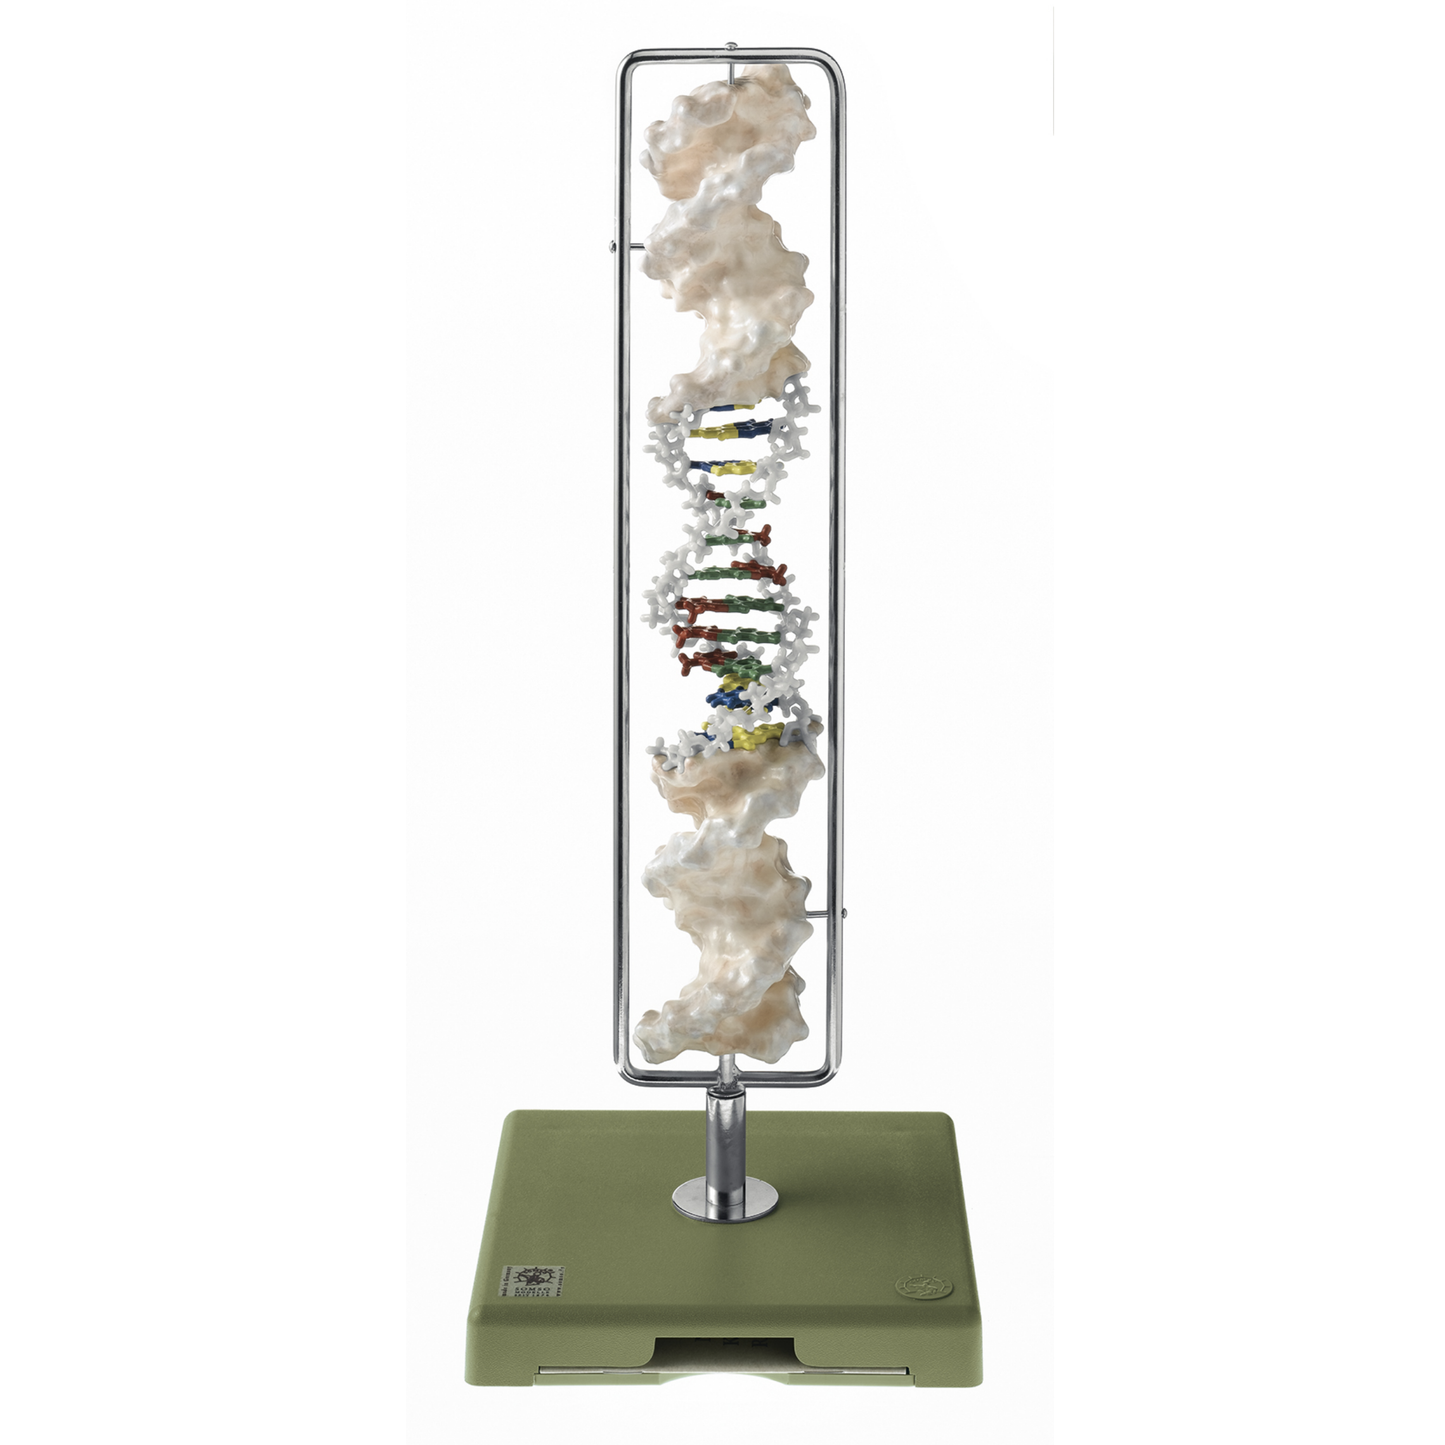 Exclusive and complete model of DNA presented on a rotating stand